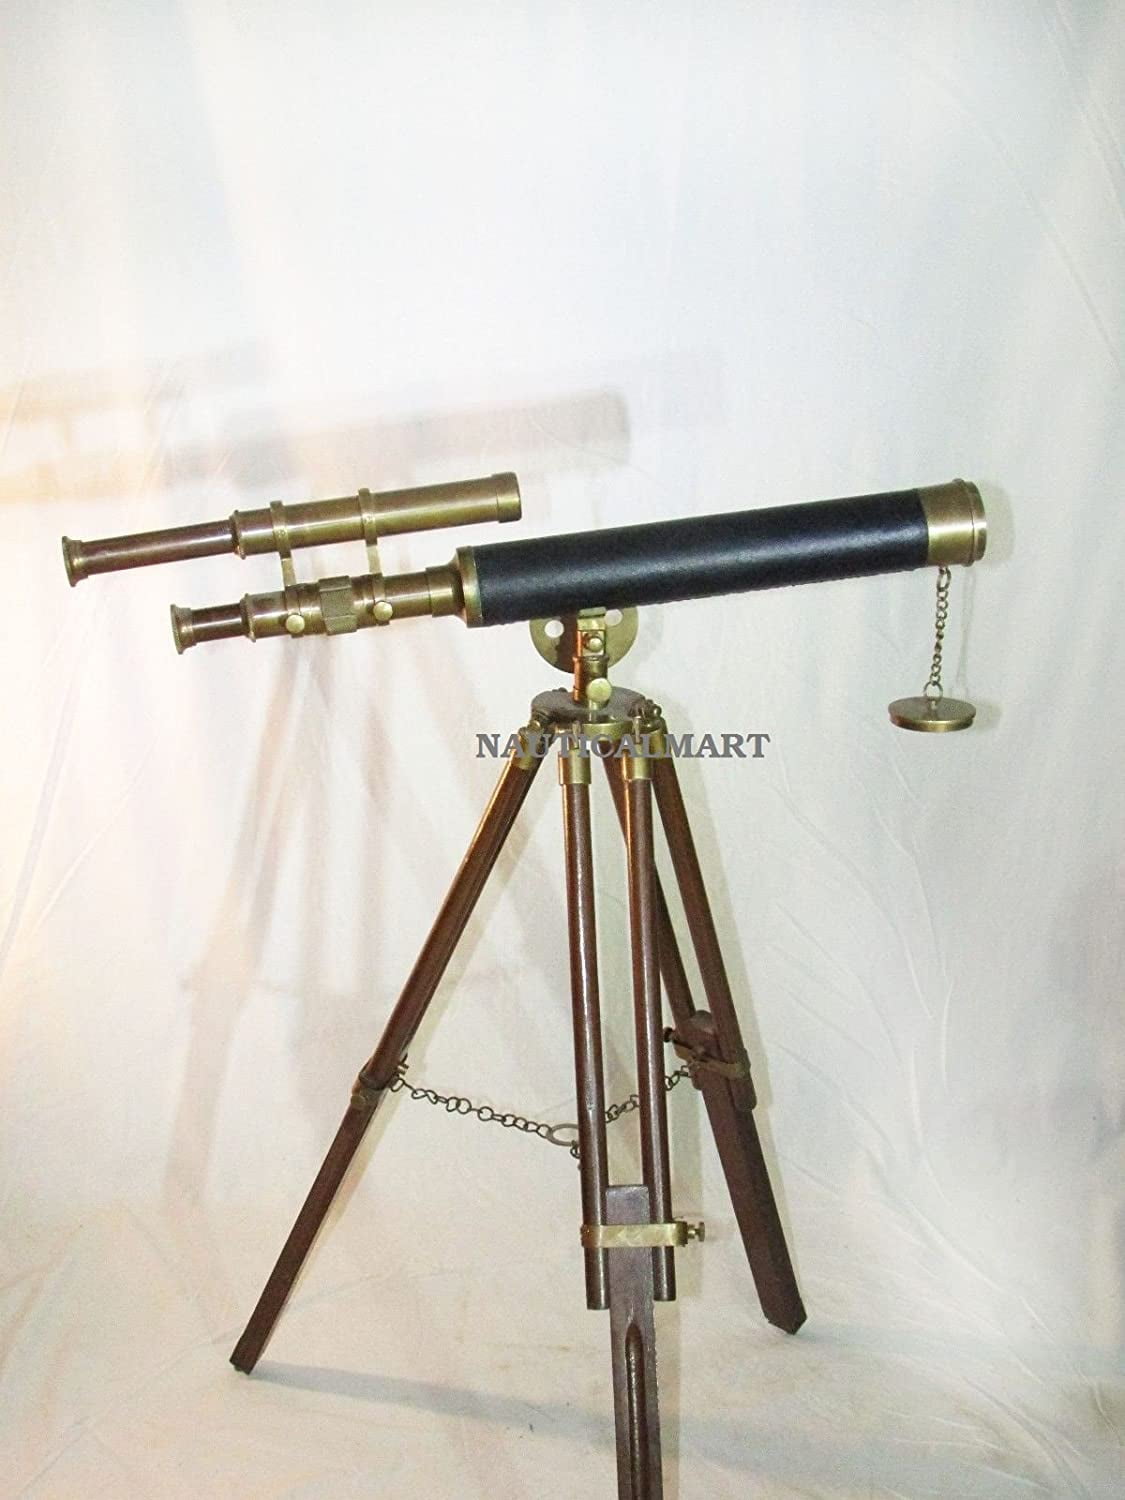 Details about   Collectible Nautical Antique Brass Telescope With Wooden Tripod Stand Desk Decor 